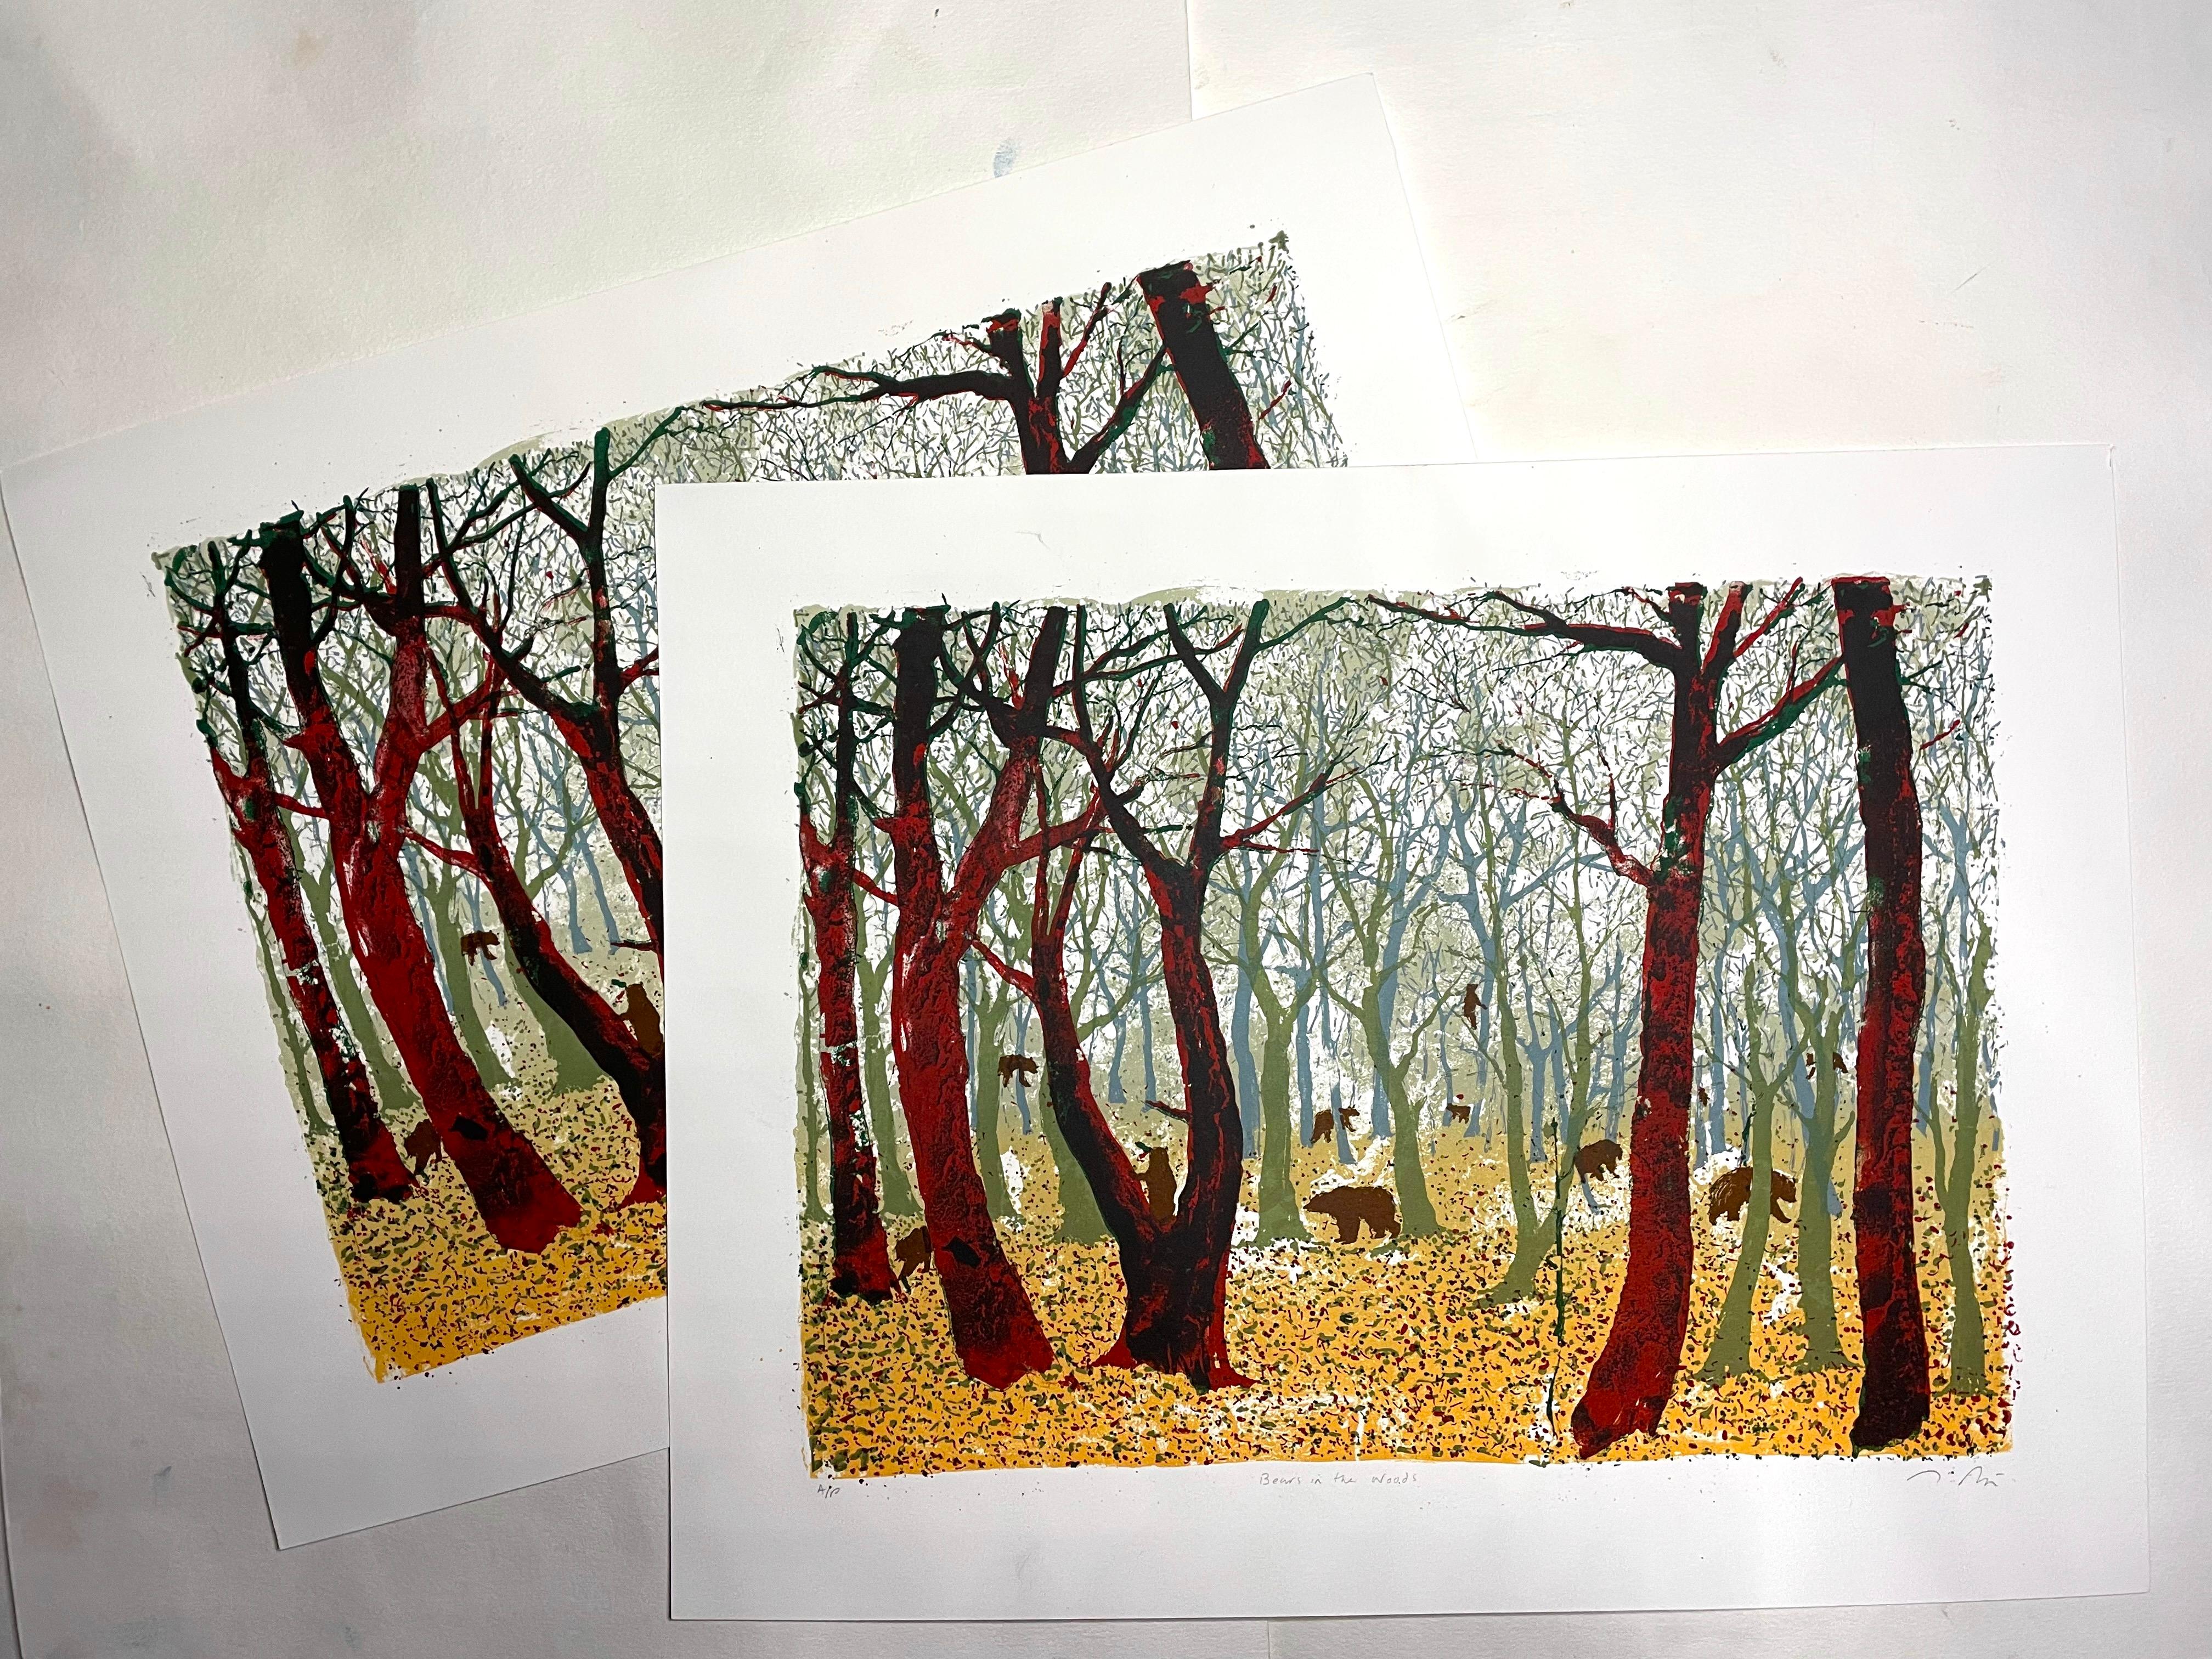 Bears in the Woods, impression d'art, chiens, animaux, folklore, art bleu abordable - Print de Tim Southall